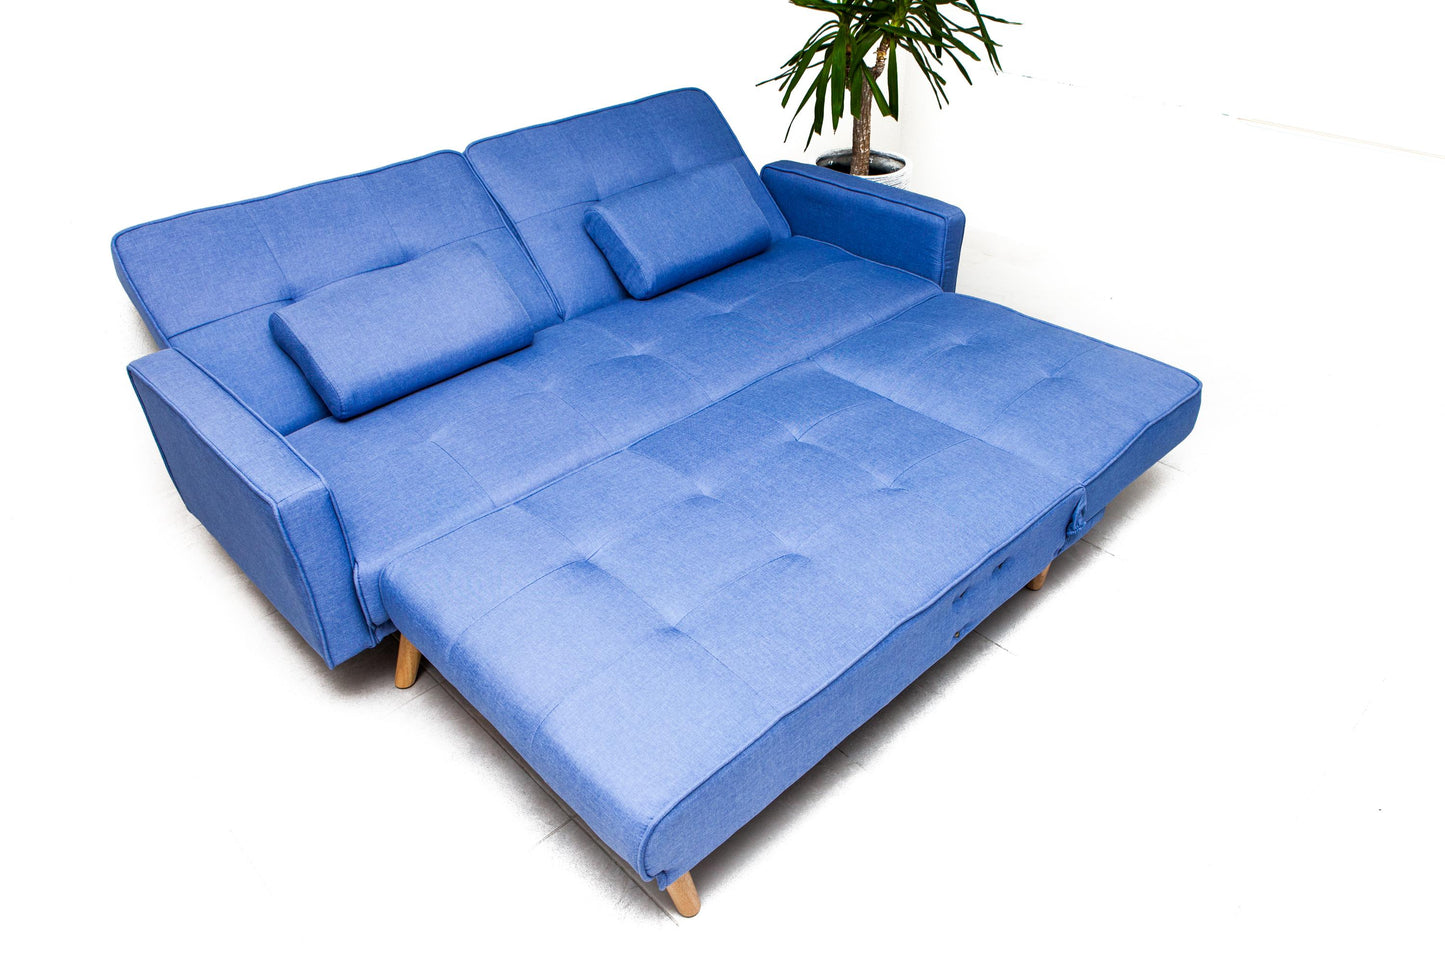 Lorenza - Sofa Bed with Chaise